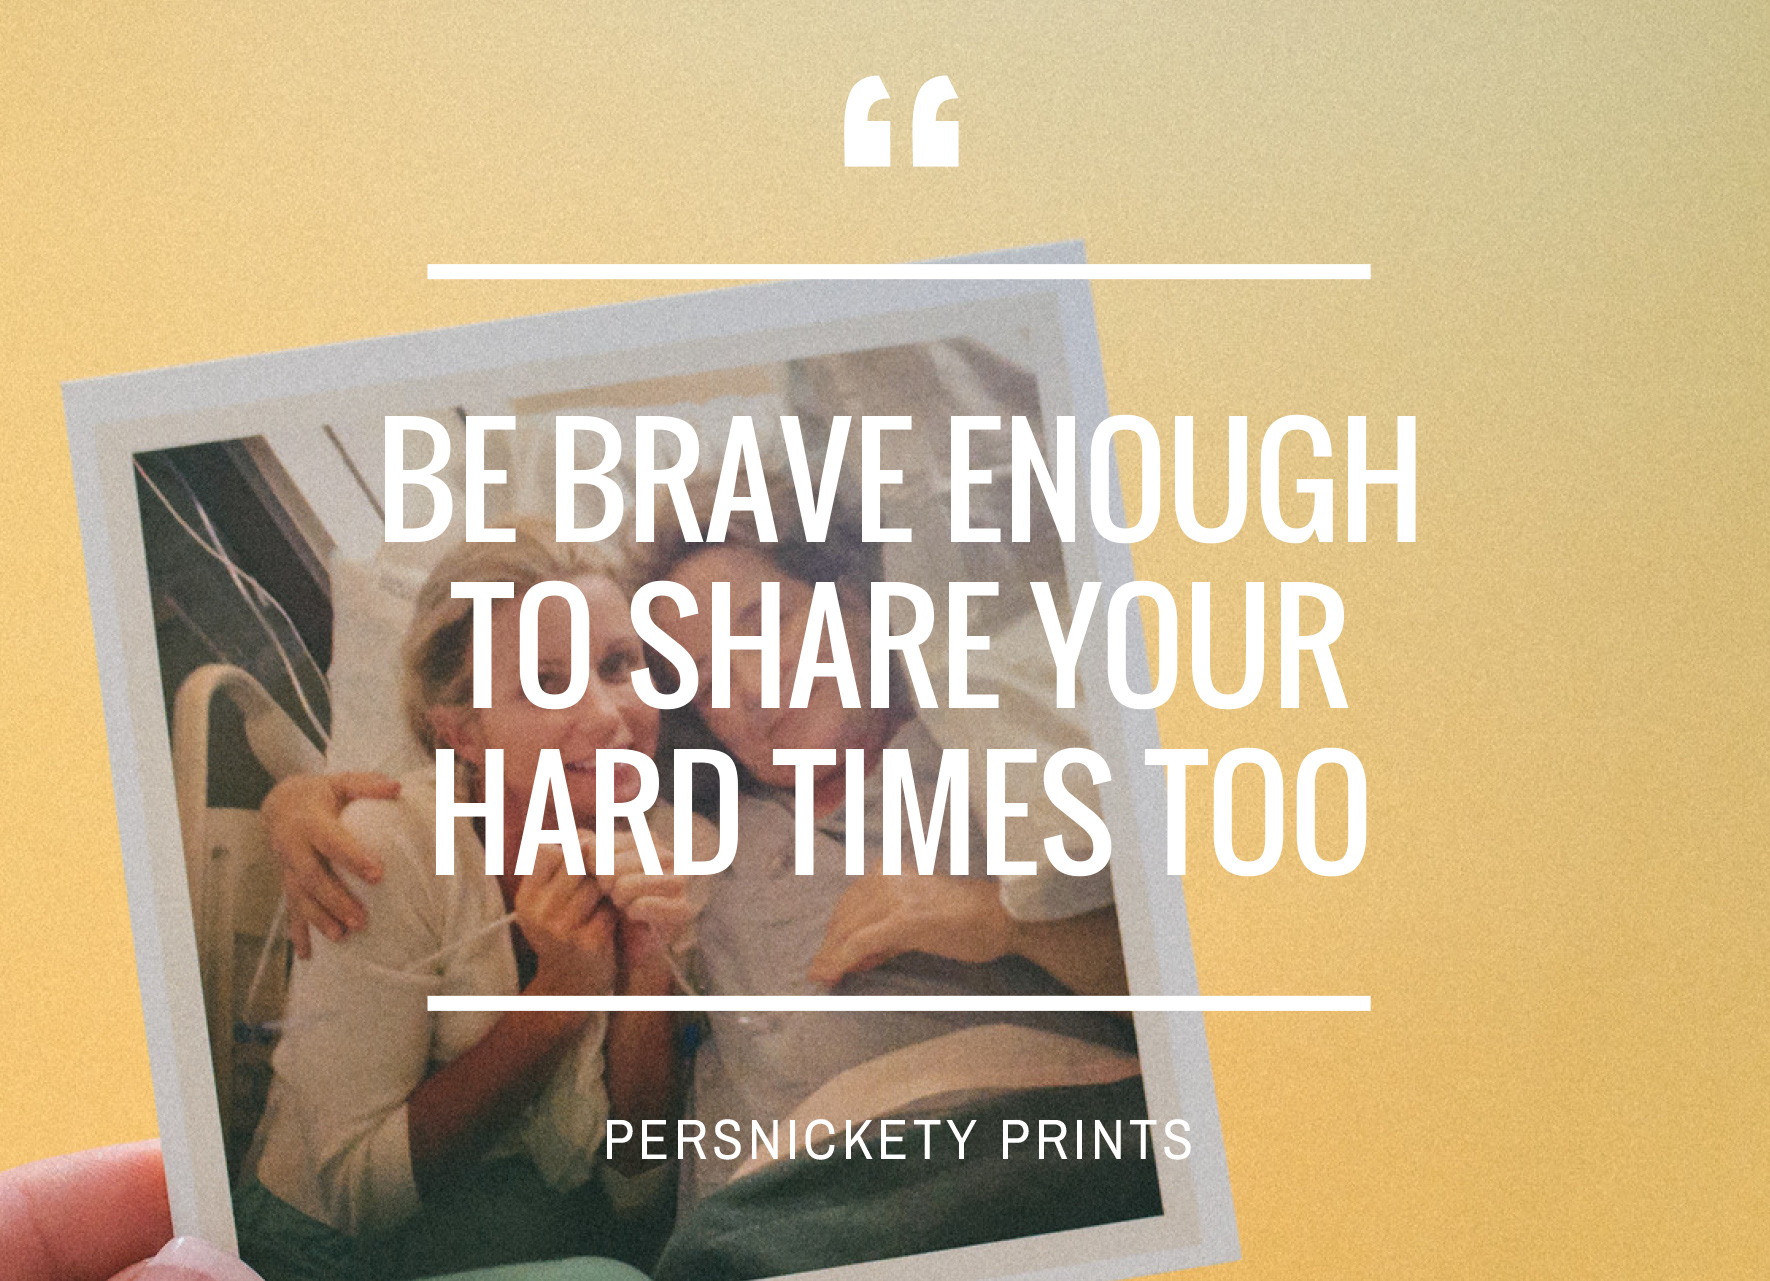 Be brave enough to share your hard times too